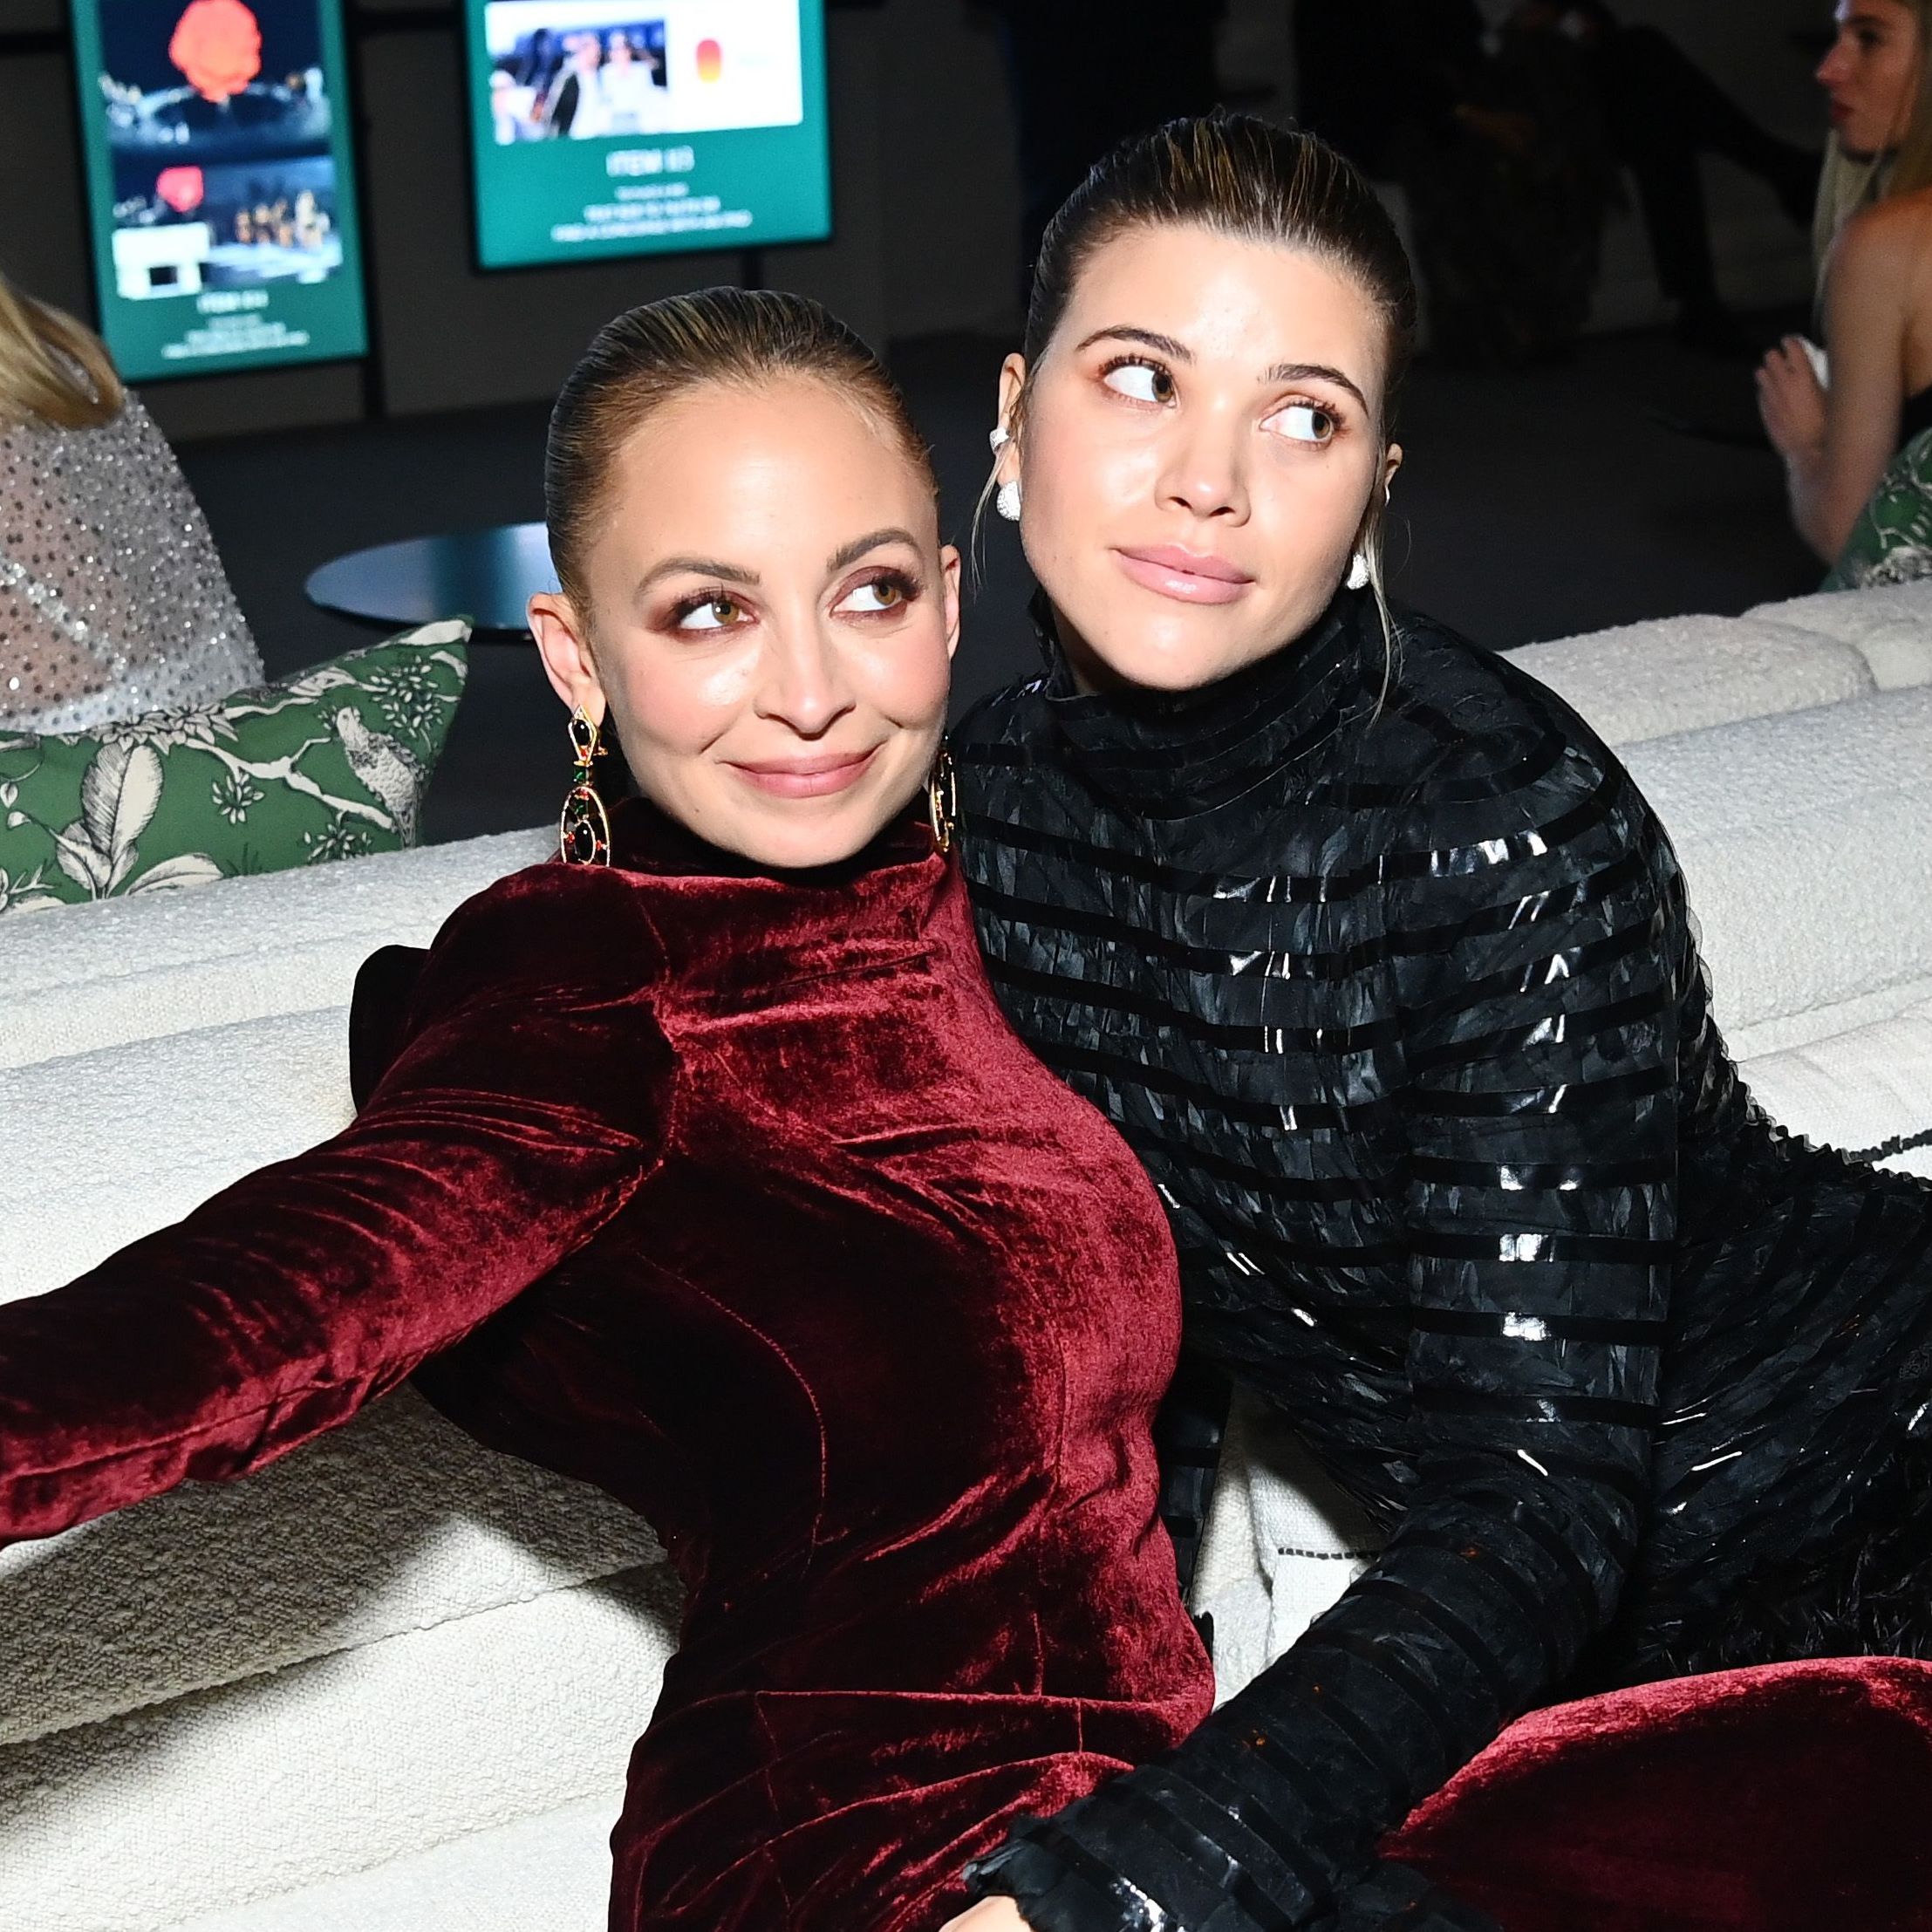 Sisters Nicole Richie and Sofia Richie Grainge Hung Out With Their Hubbies at the Baby2Baby Gala